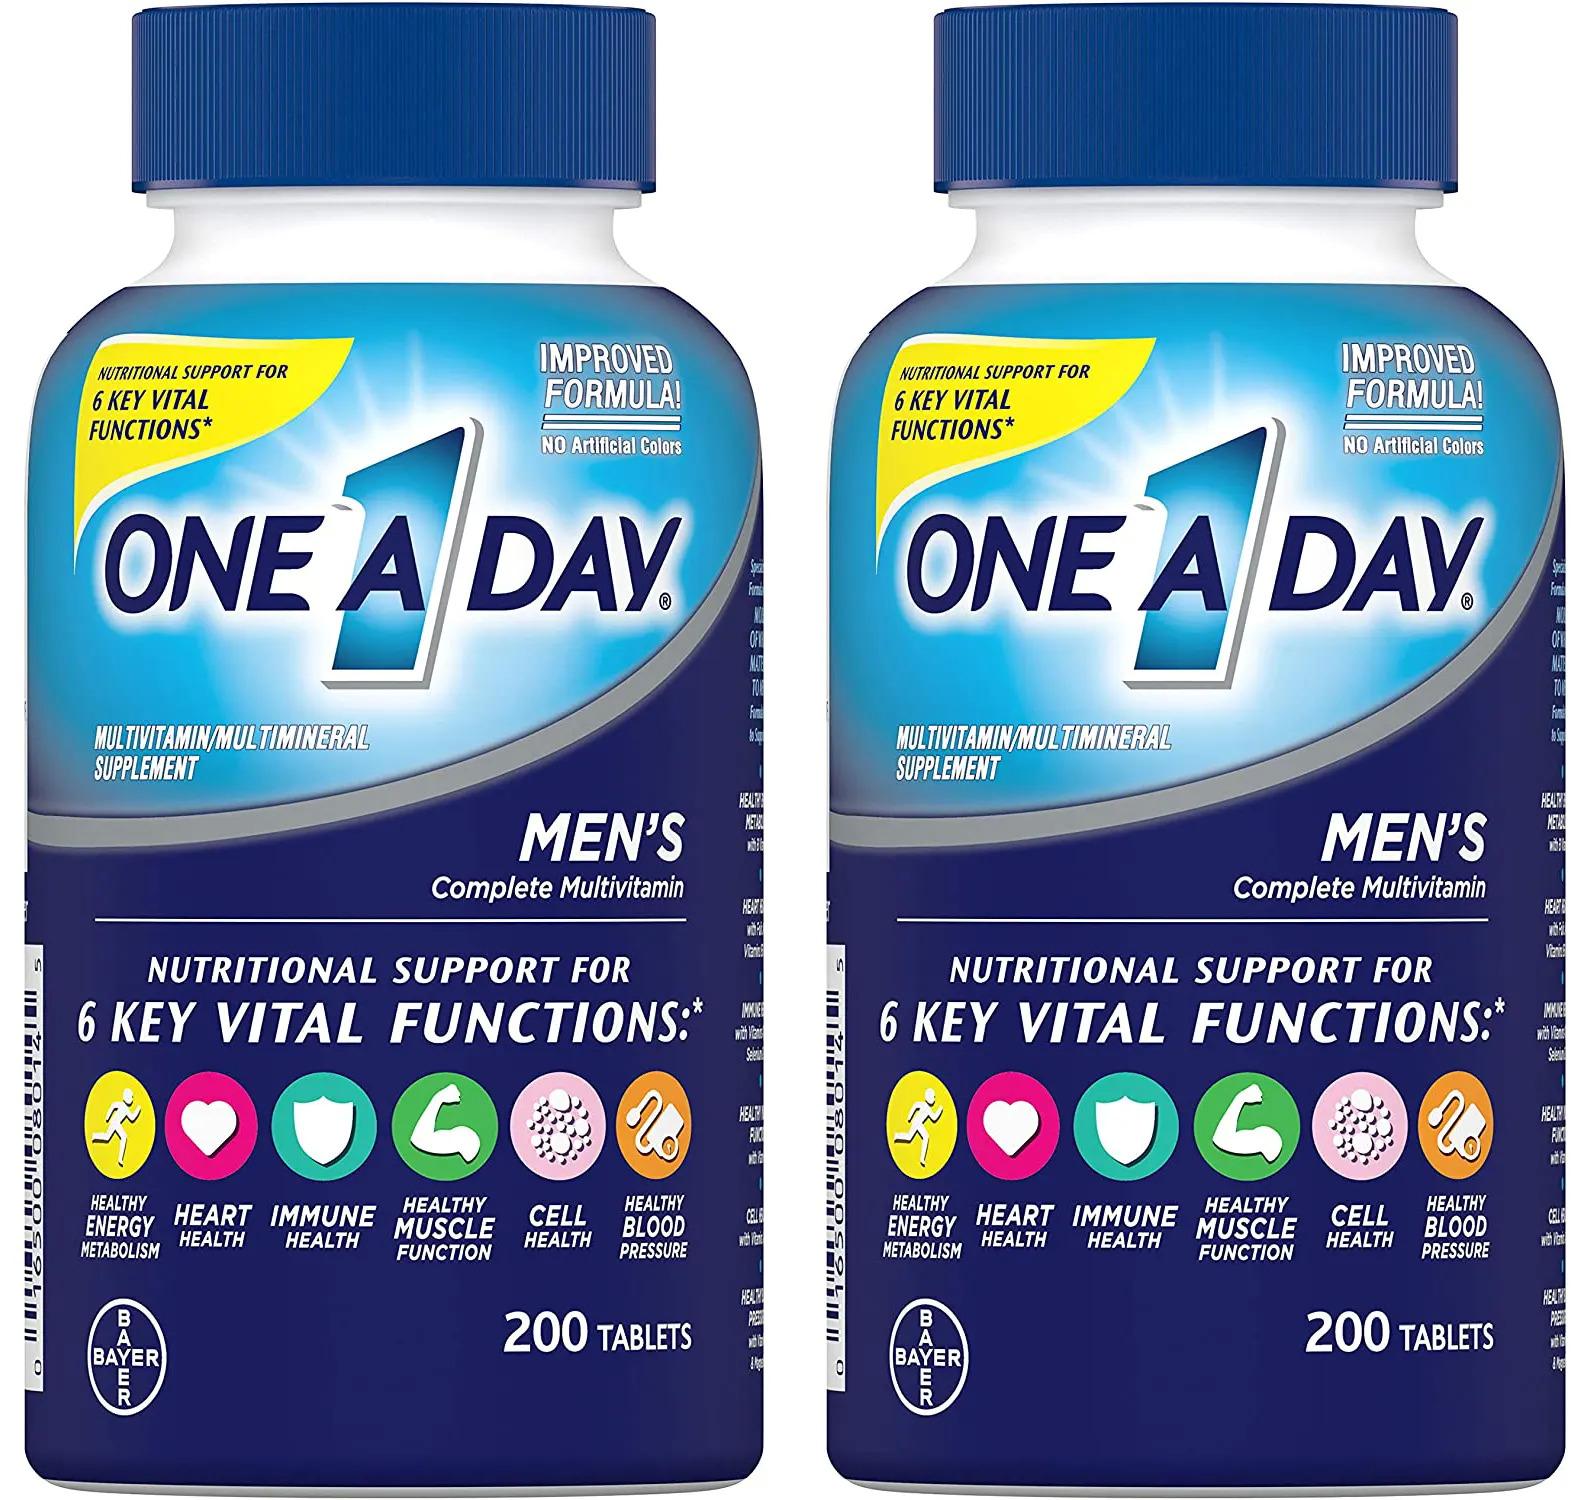 400 One A Day Mens Multivitamins for $17.21 Shipped